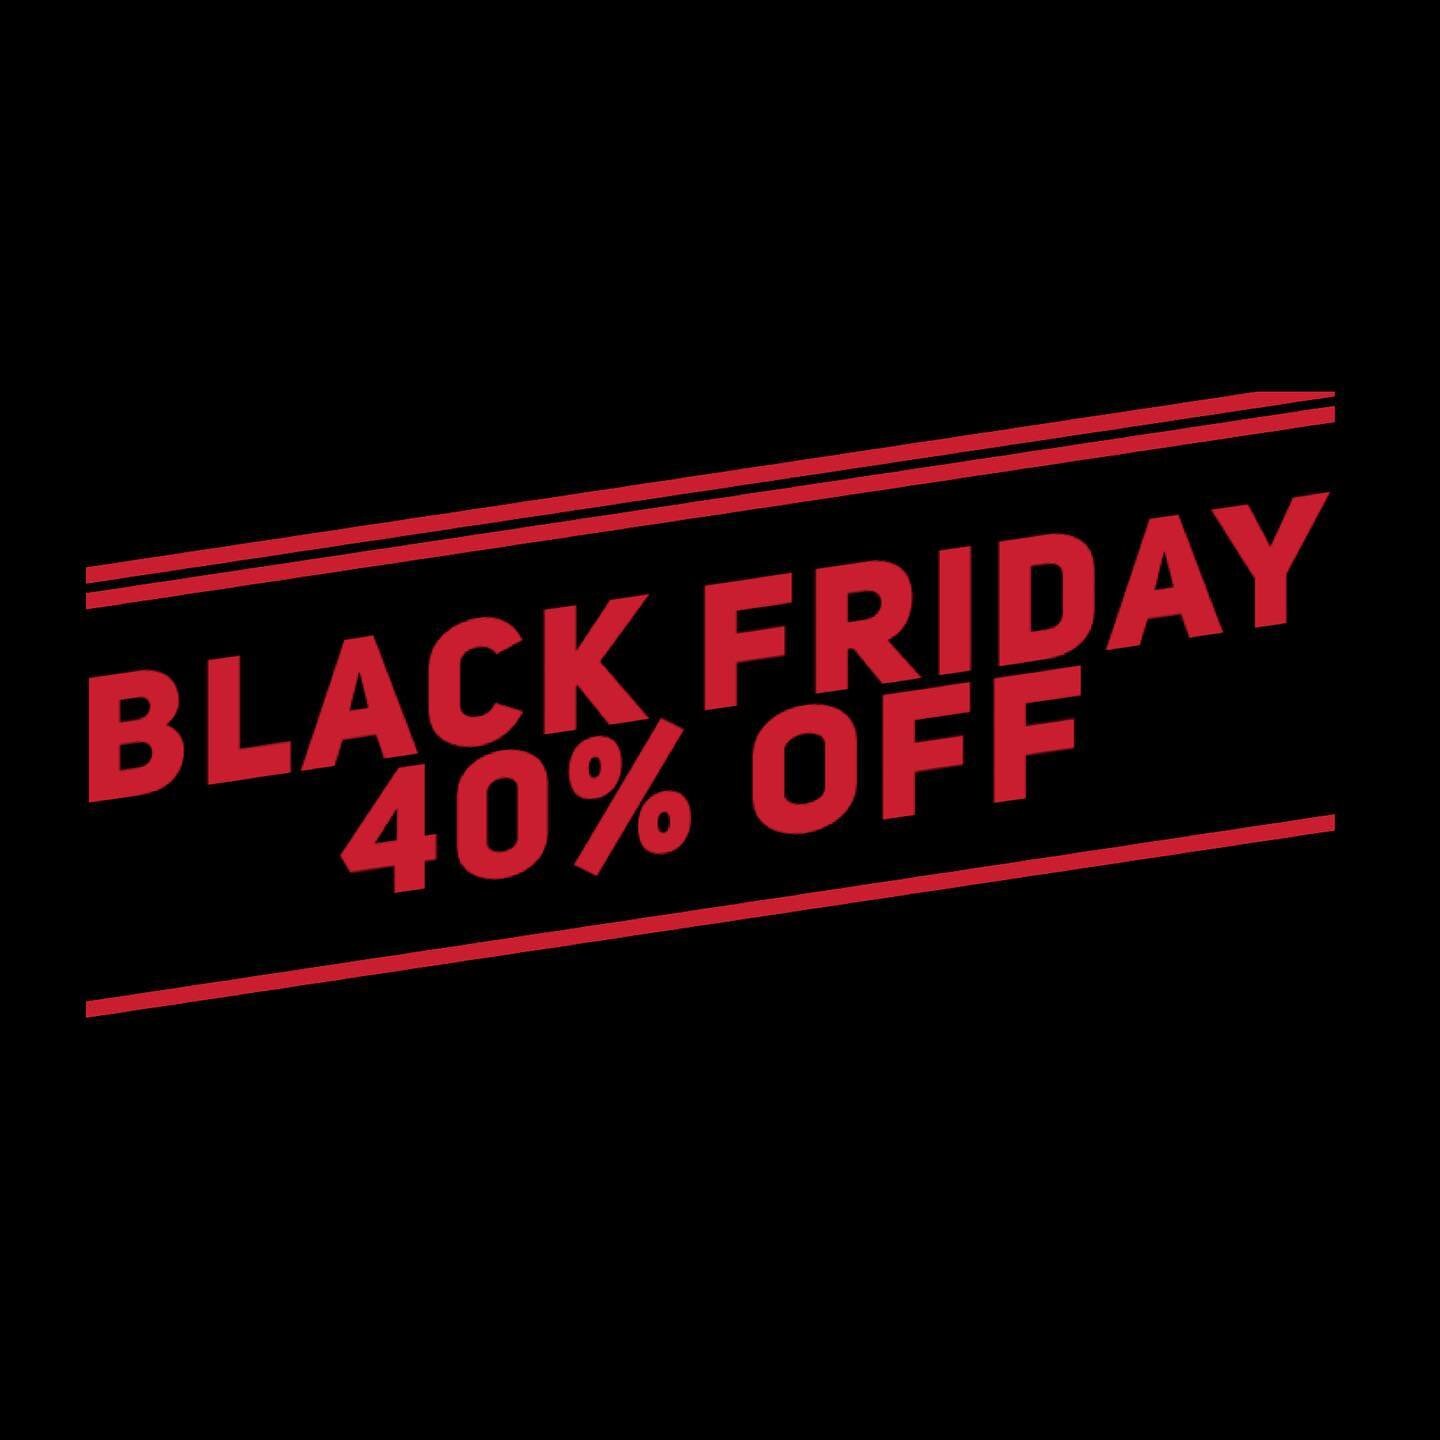 ✨Save 40% with promo code BLACKFRIDAY ✨
👉🏻 Recruit the Core online self paced 10CEC&rsquo;s
👉🏻All beginner and intermediate Yoga practices for every body 
Use the promo code at checkout for discount